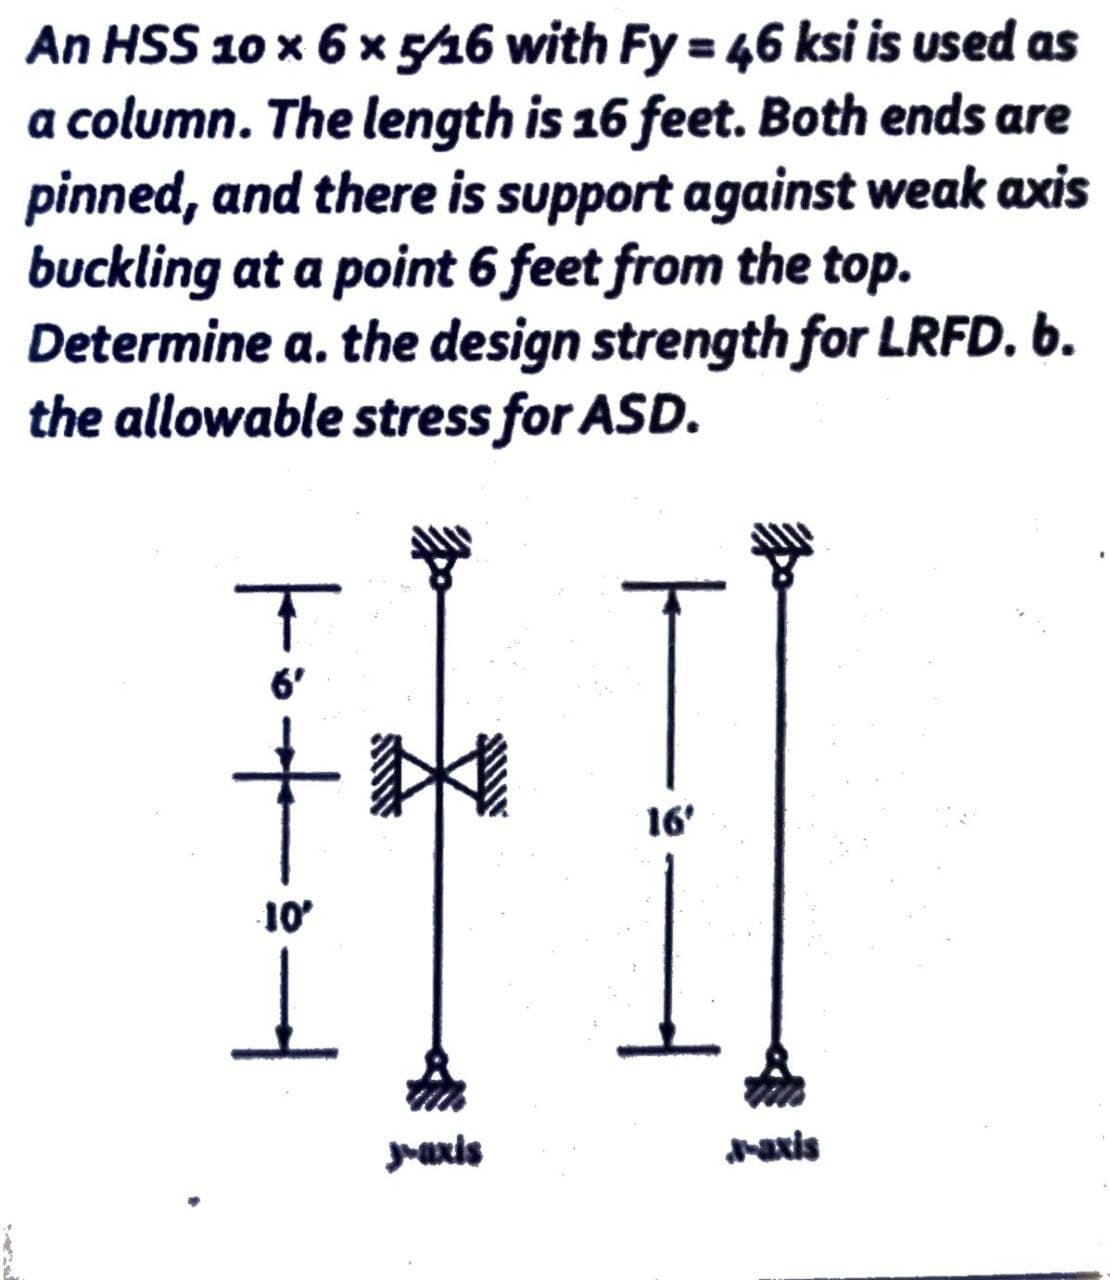 An HSS 10 x 6 x 5/16 with Fy = 46 ksi is used as
a column. The length is 16 feet. Both ends are
pinned, and there is support against weak axis
buckling at a point 6 feet from the top.
Determine a. the design strength for LRFD. b.
the allowable stress for ASD.
|·+·
10'
1
y-axis
16'
J-axis